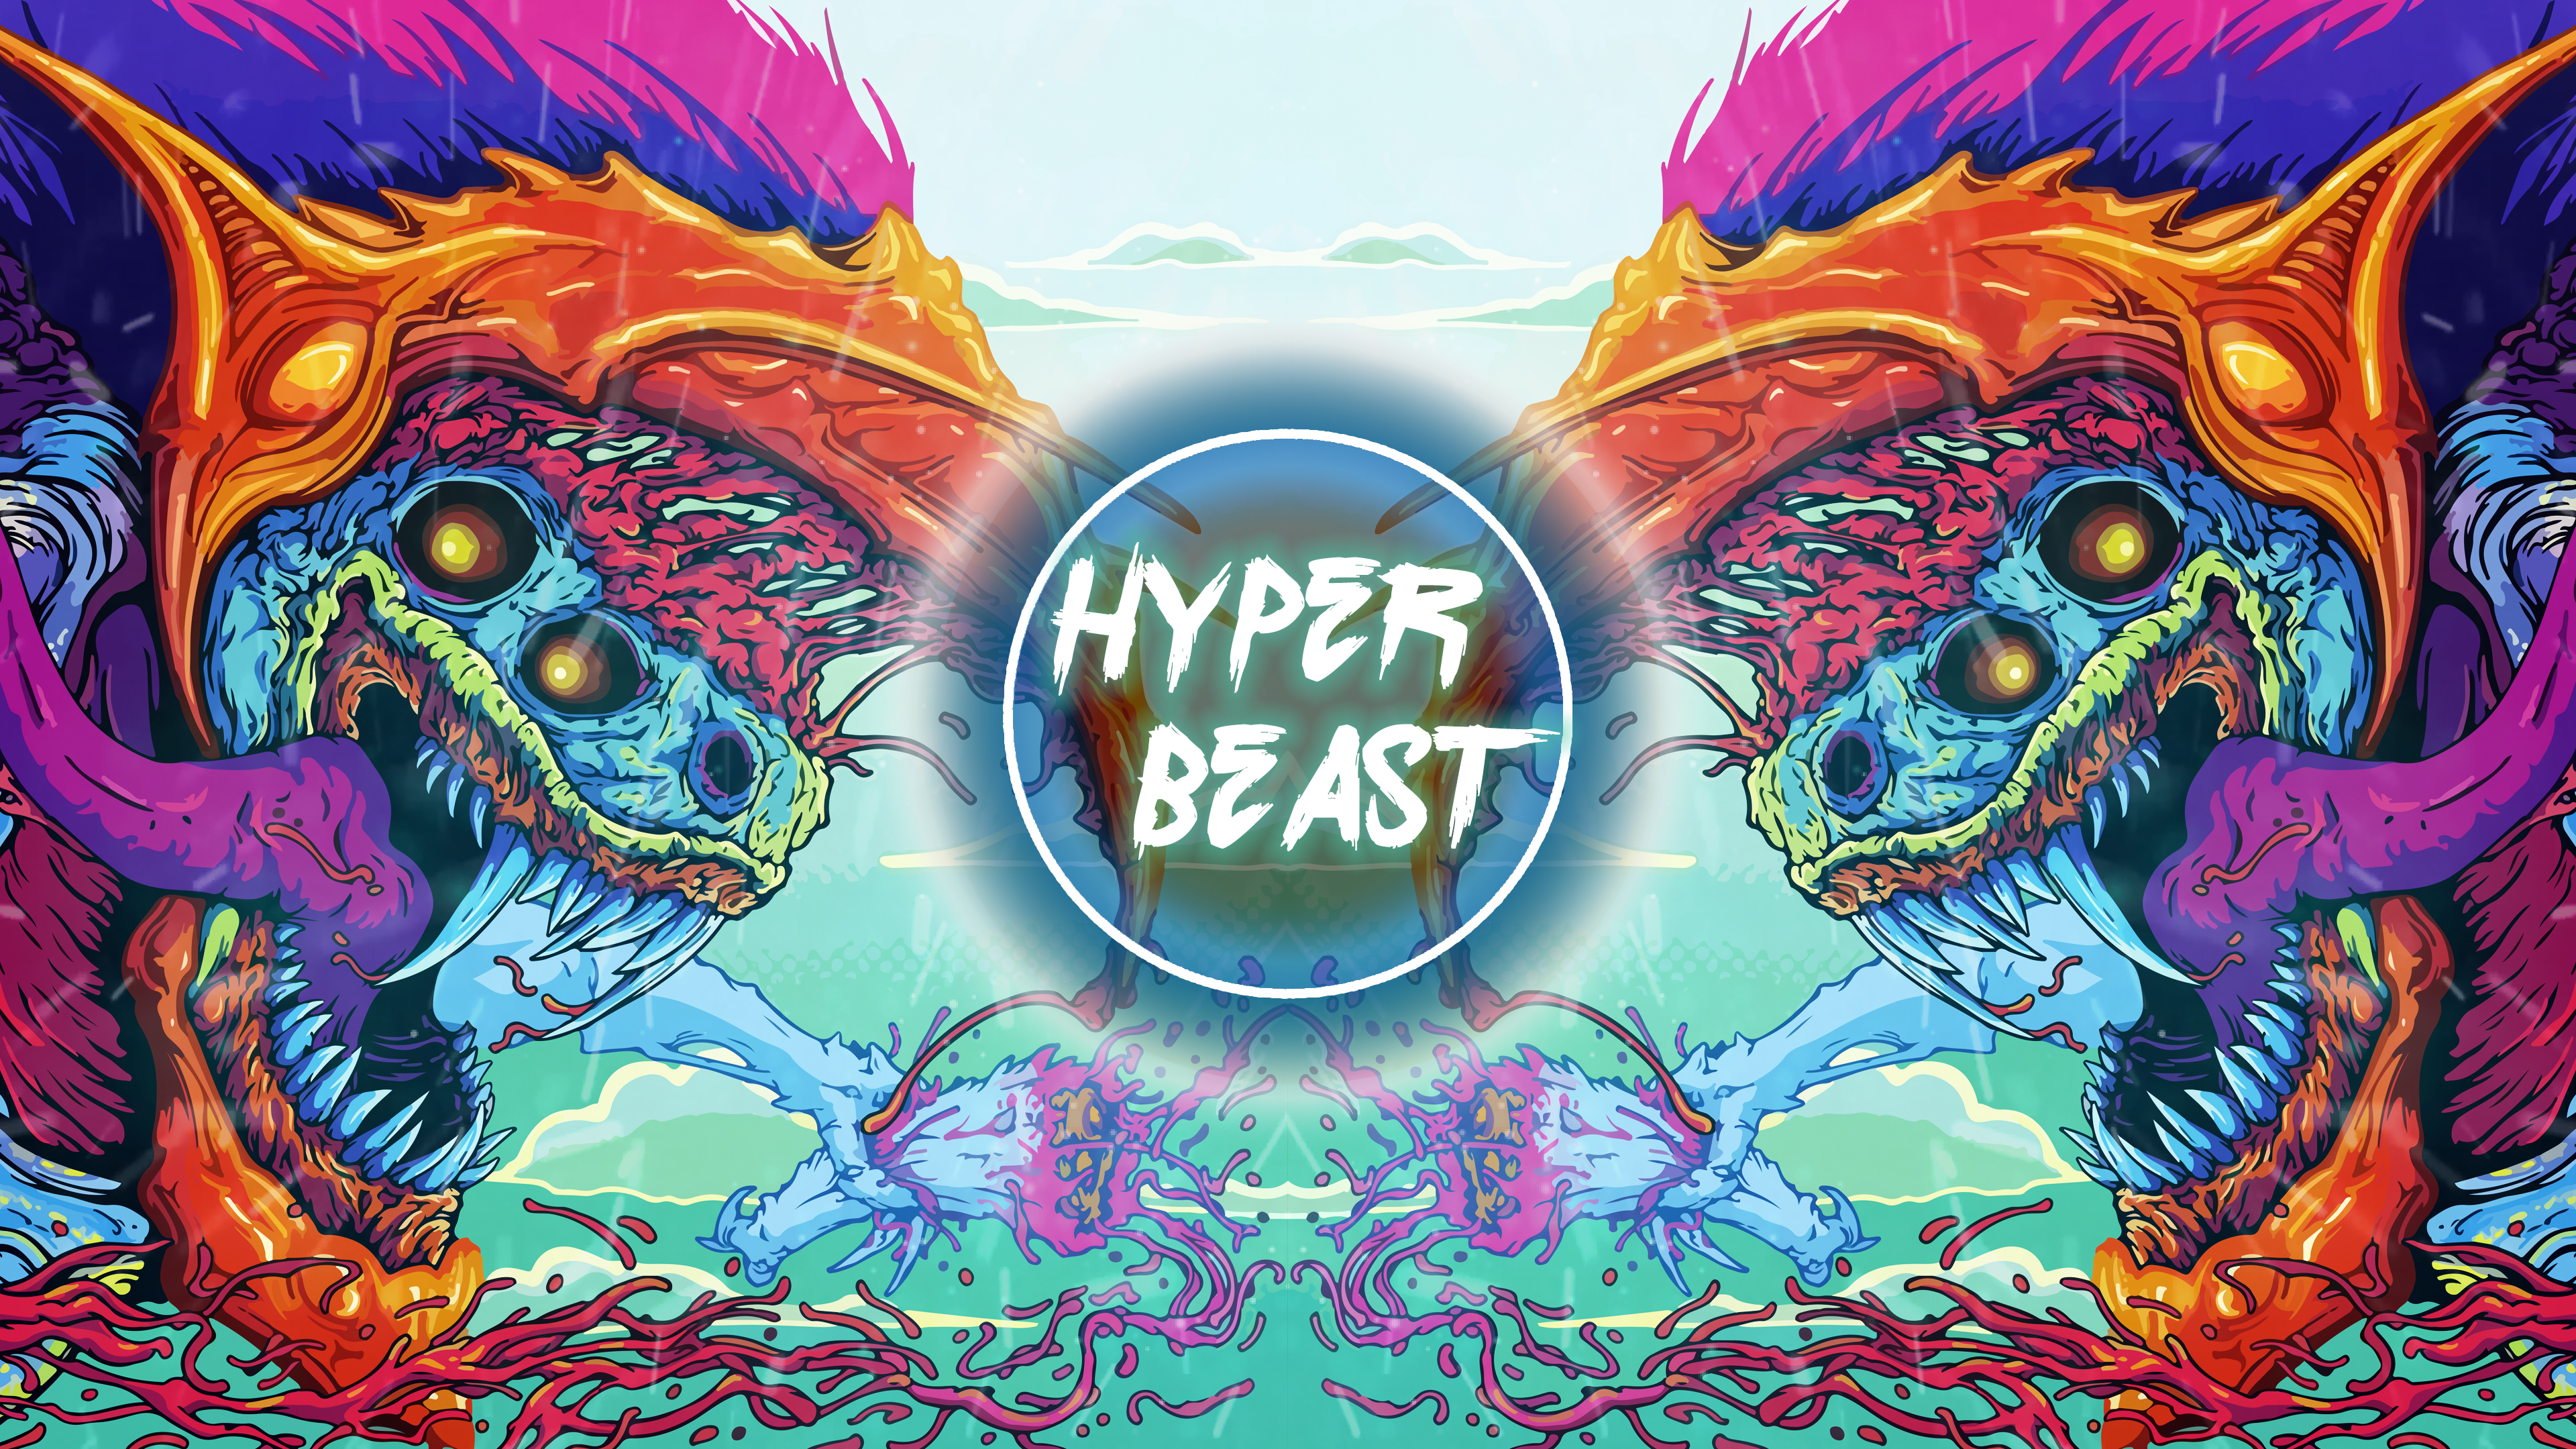 Csgo Hyper Beast Wallpaper Image In Collection